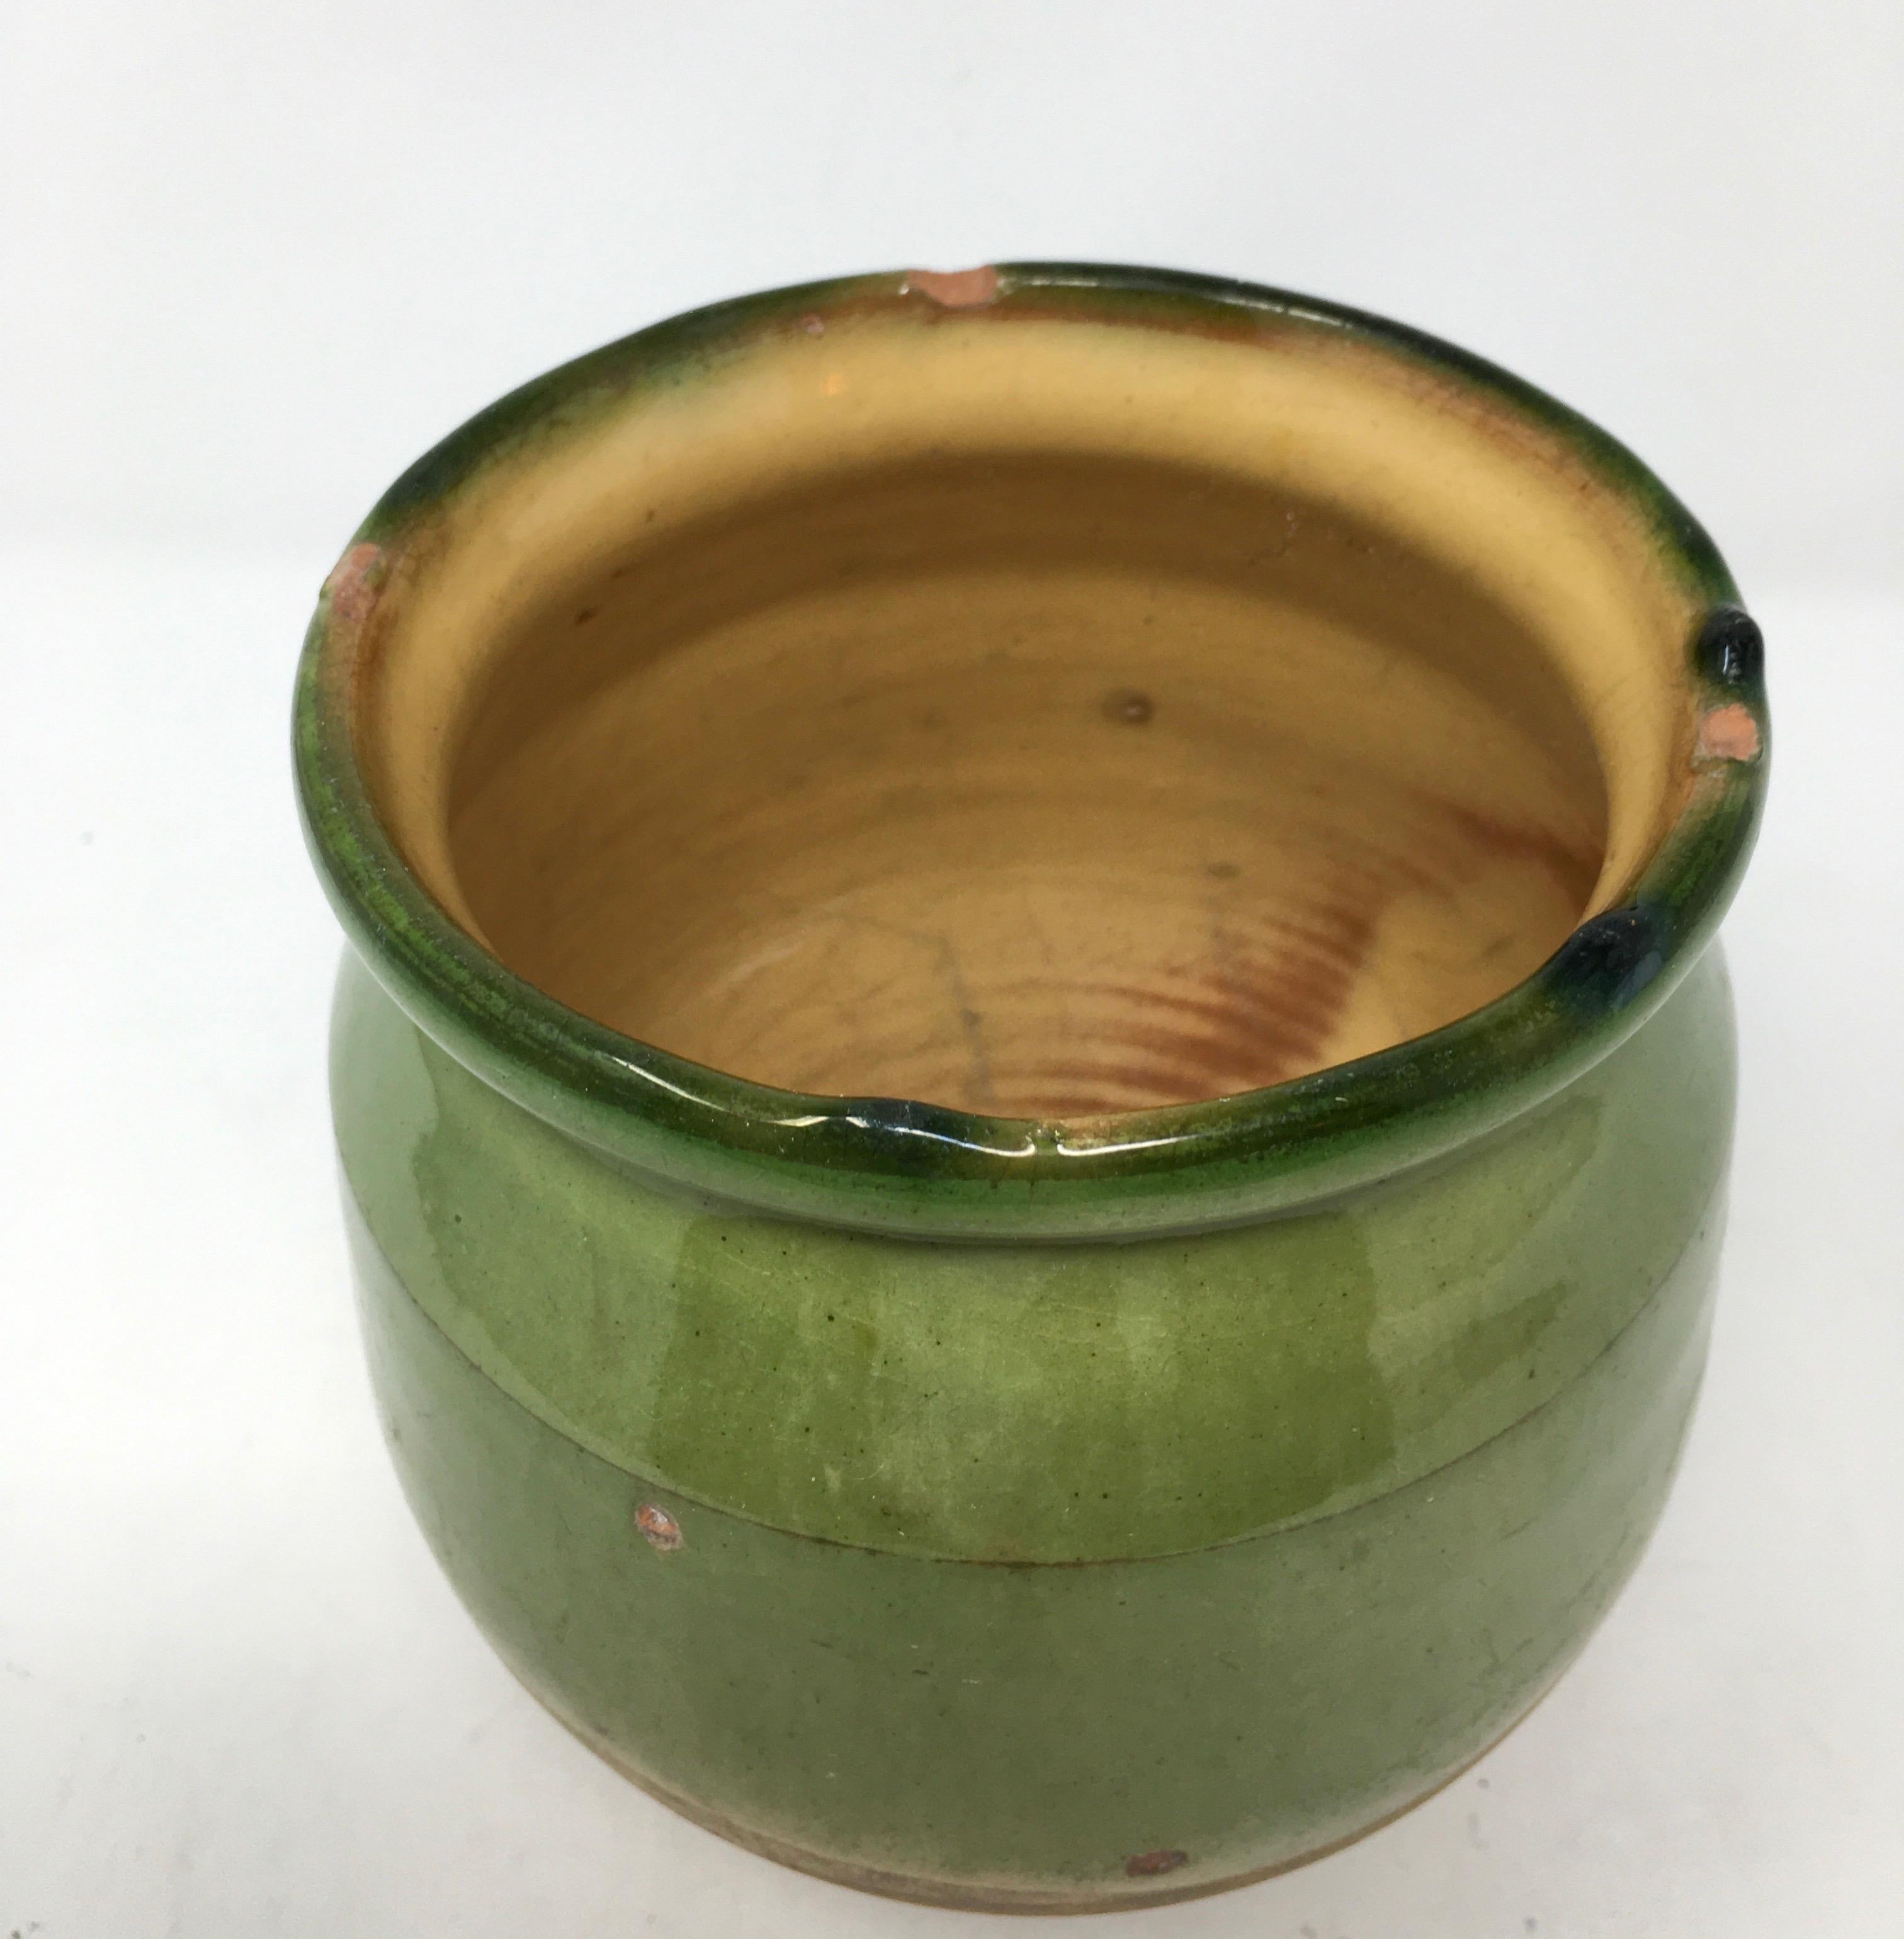 This provencial confit pot from the South of France has a beautiful green glaze on the exterior and a lovely yellow glaze on the interior. The piece is a wonderful in size to hold flowers or cooking utensils.

This piece weighs 1.5 lbs.